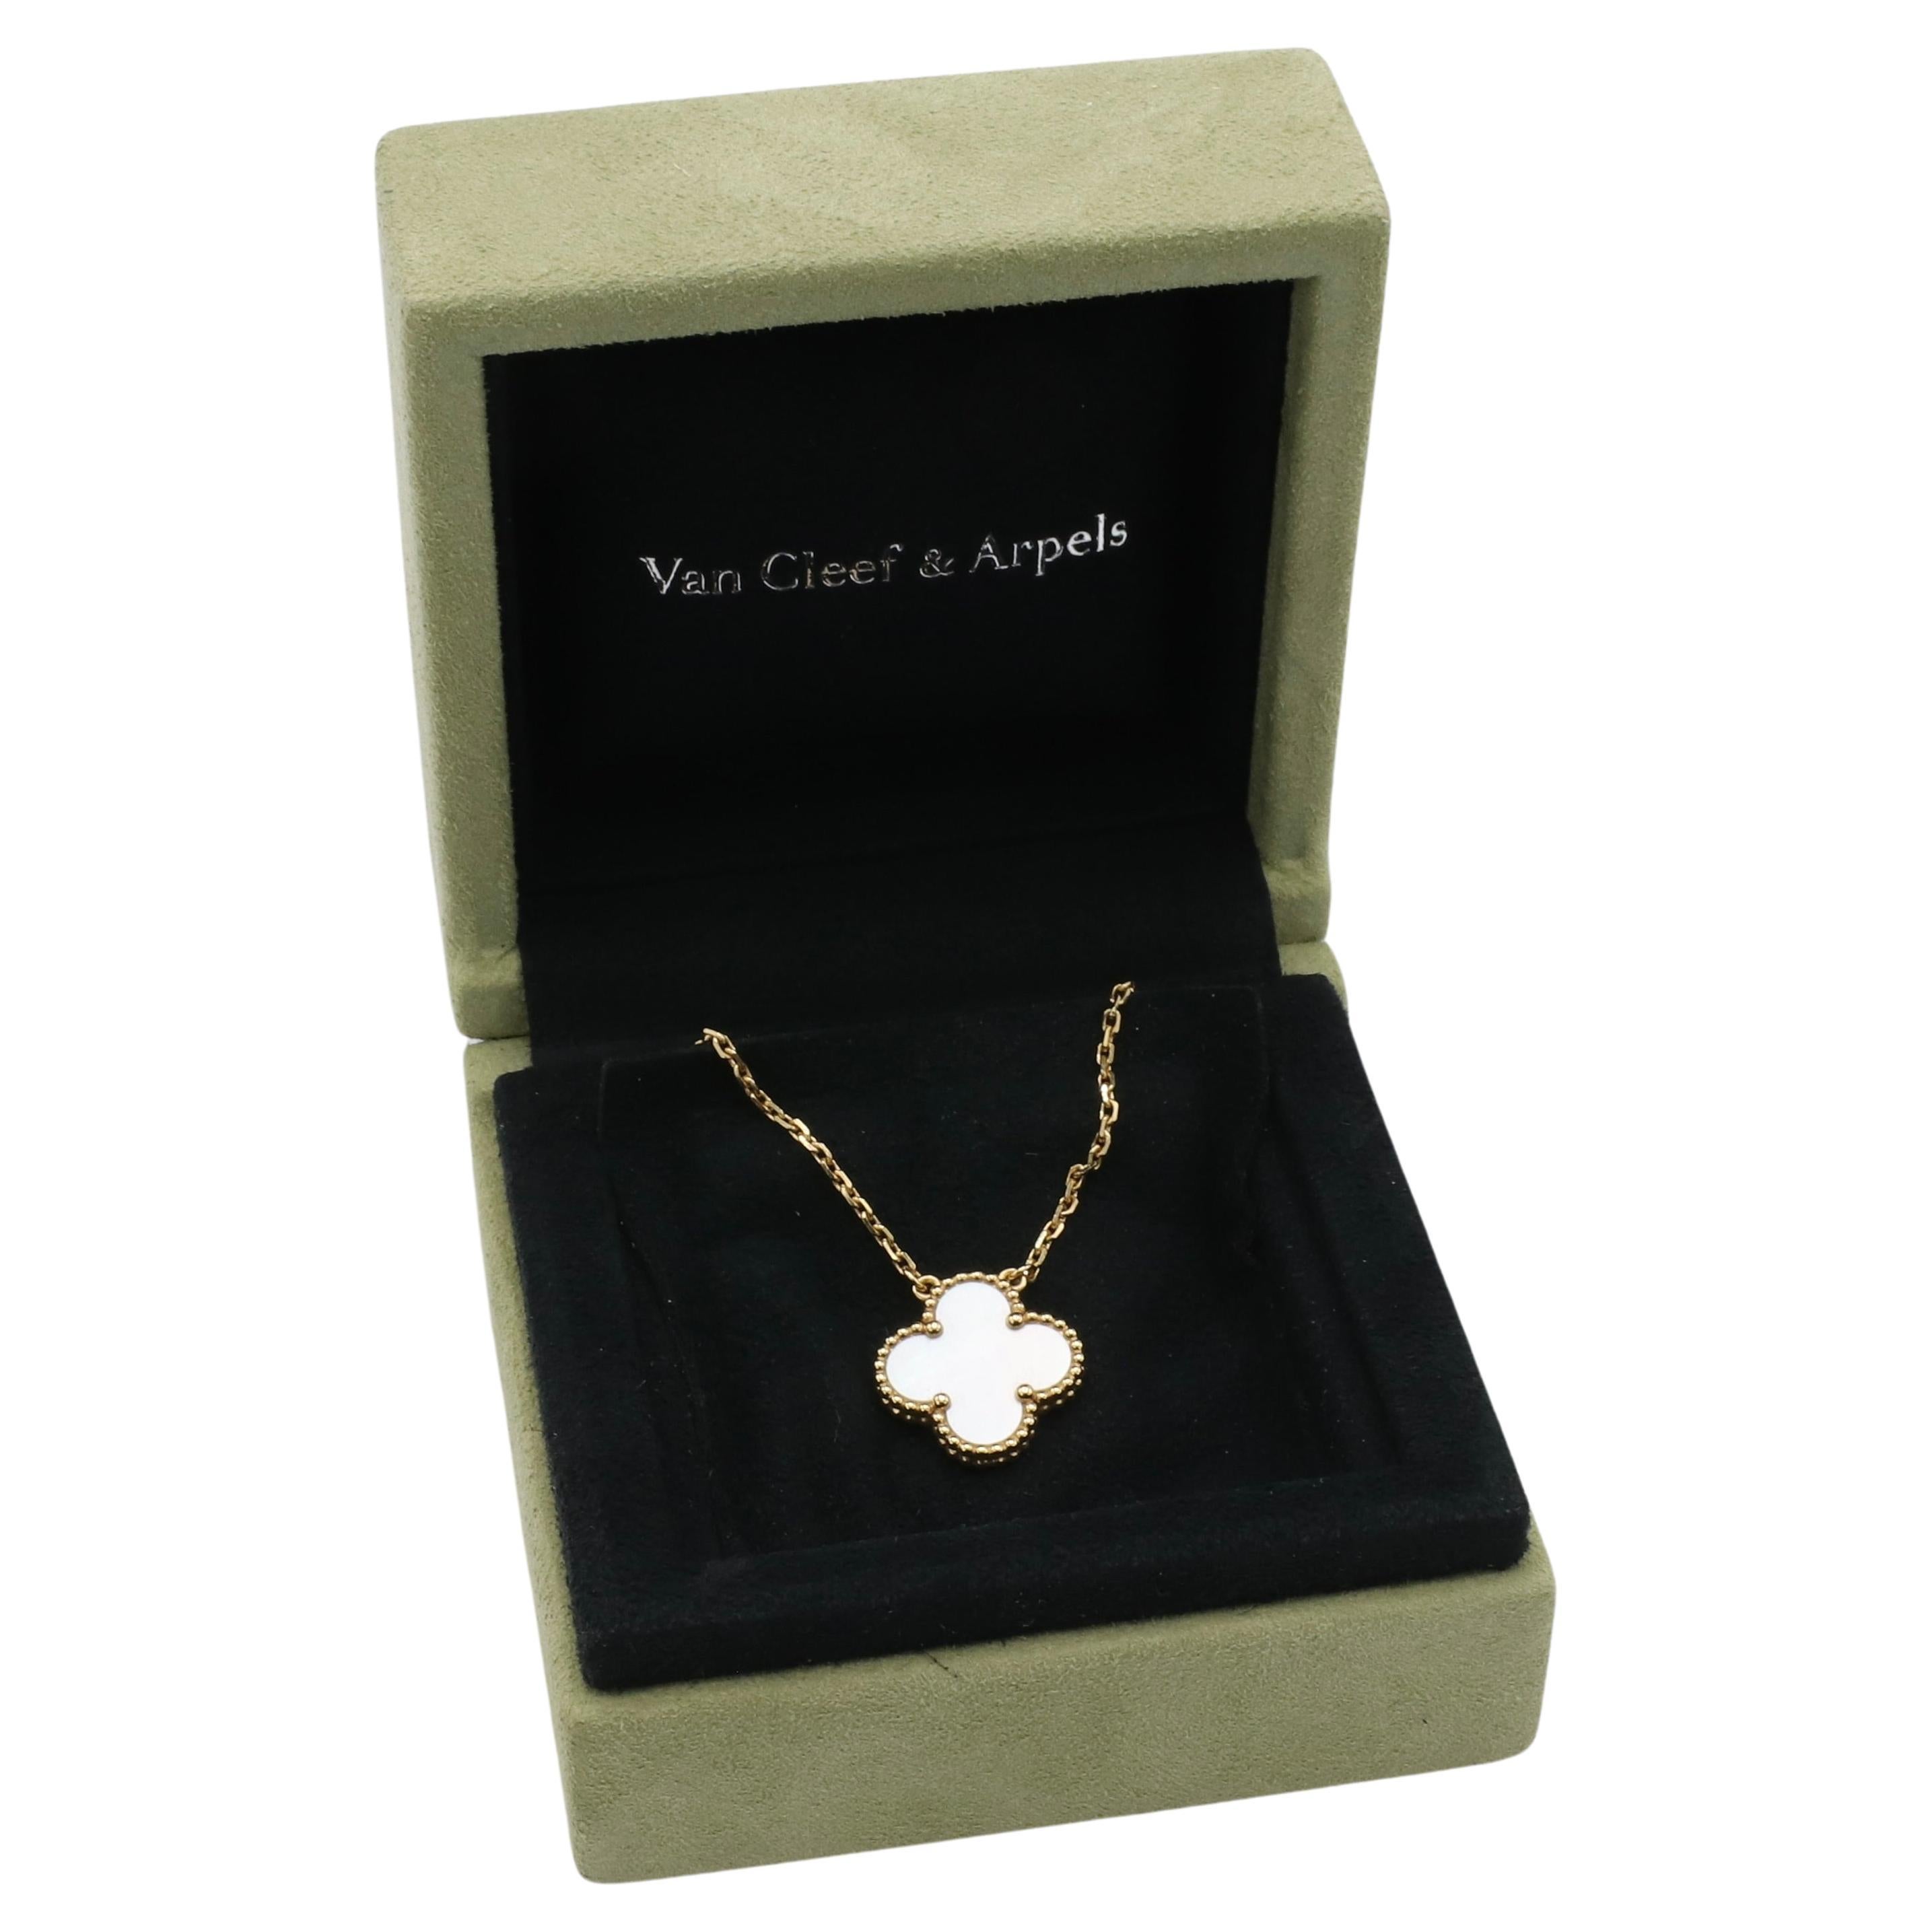 Van Cleef & Arpels VCA Vintage Alhambra Mother of Pearl Yellow Gold Pendant Necklace
Metal: 18k yellow gold
Weight: 5.27 grams
Pendant: Mother of Pearl, 14.7mm
Chain: 16.54 inches
Retail: $2,750 USD
Note: Box included 